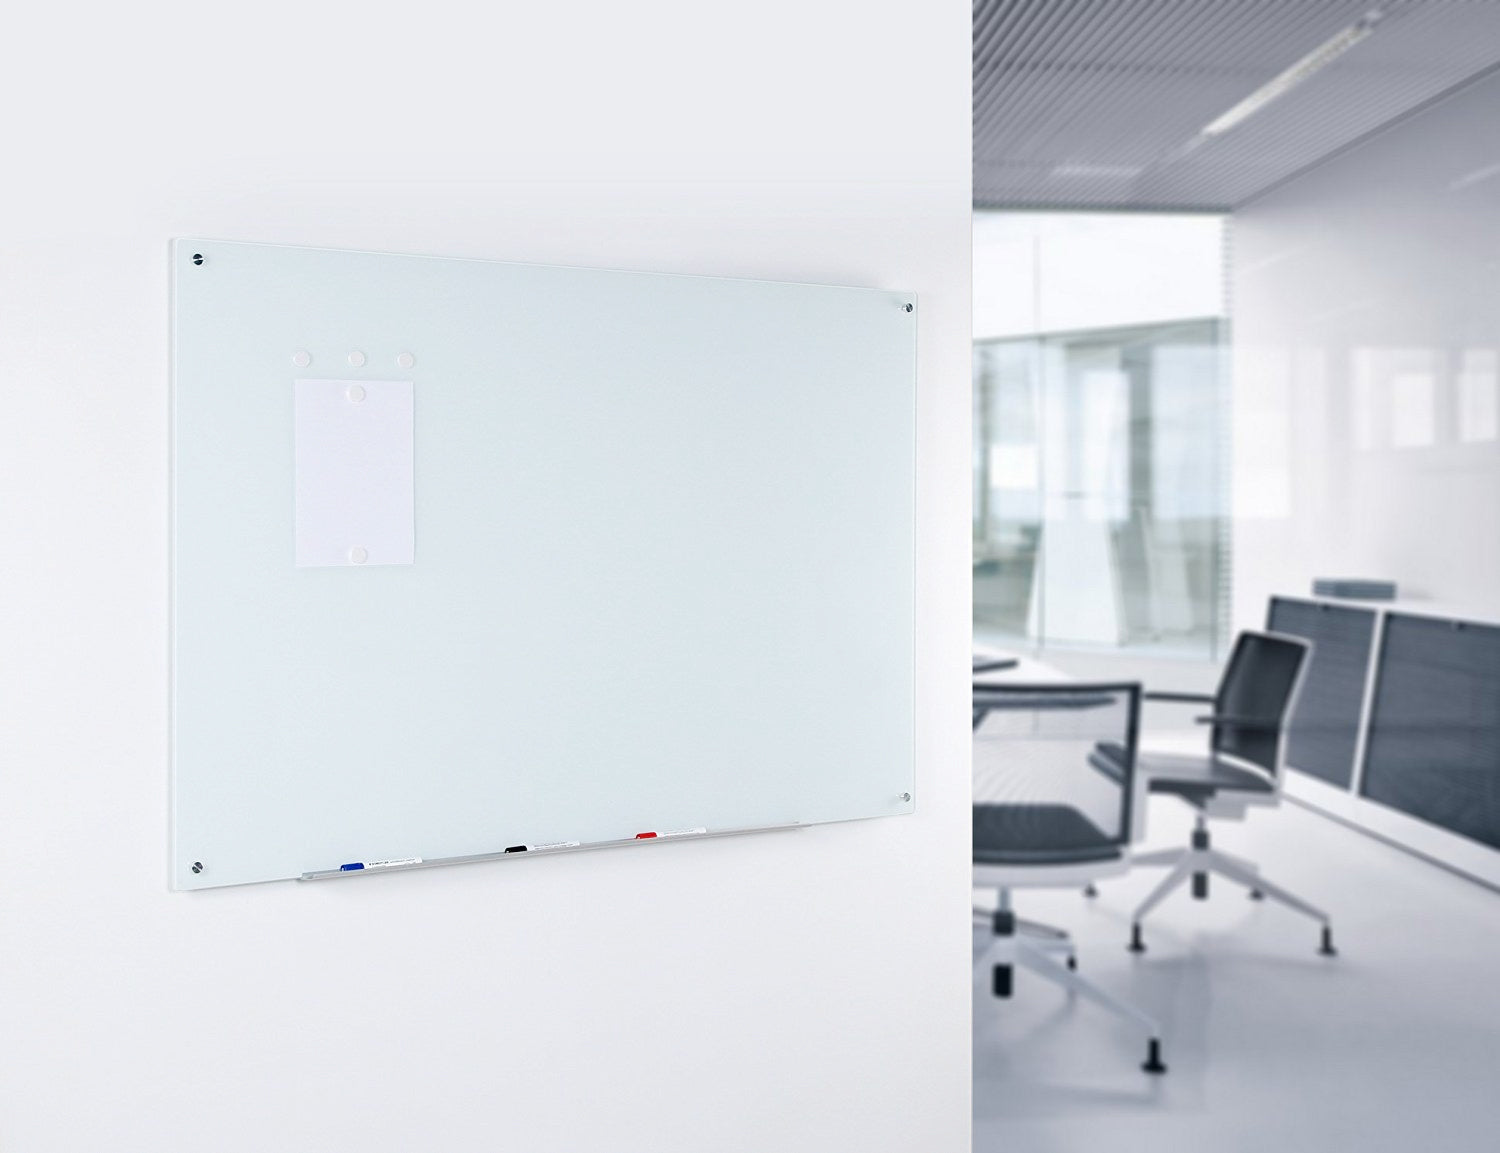 Magnetic Ultra White Glass Dry-Erase Board Set - Includes Board,  Neodymium Magnets, and Marker Tray. Shown holding documents with neodymium magnets in an office setting. 